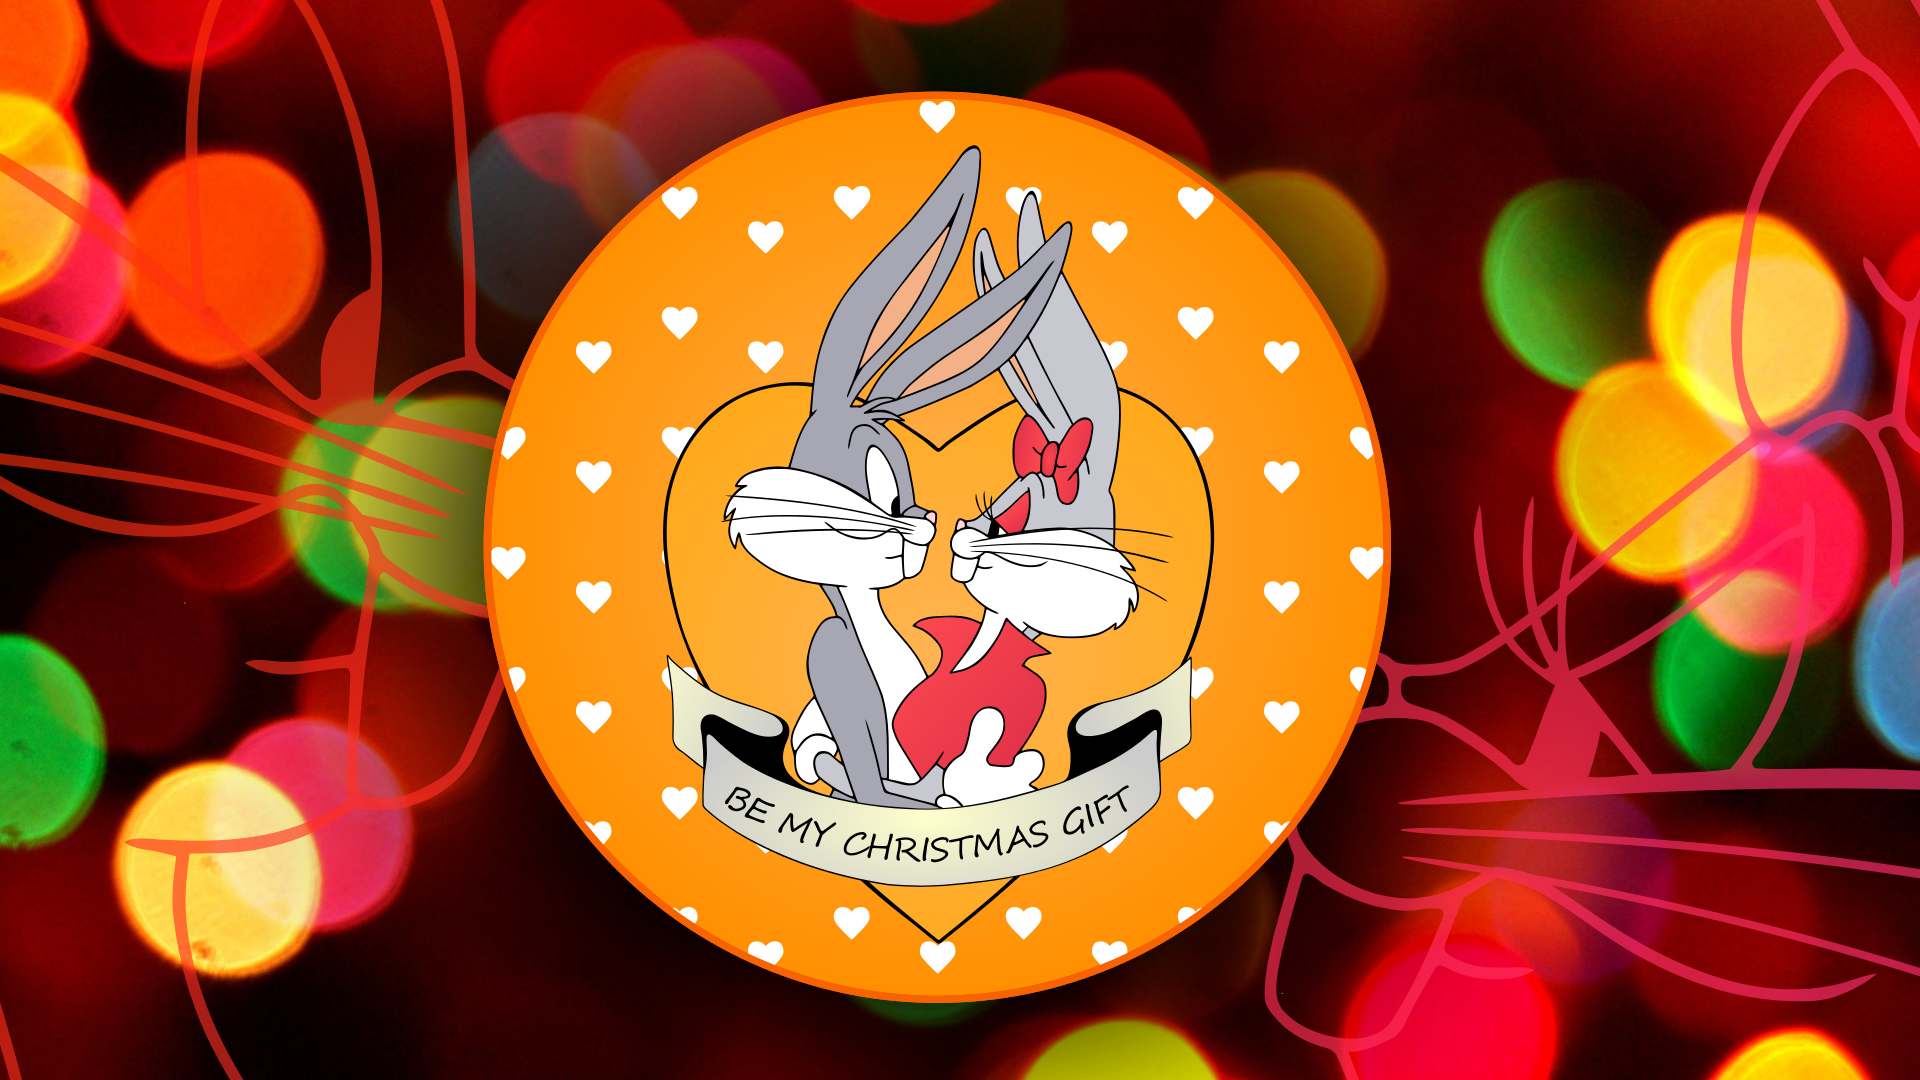 BUGS BUNNY looney tunes christmas gn wallpaper 1920x1080 160659 1920x1080